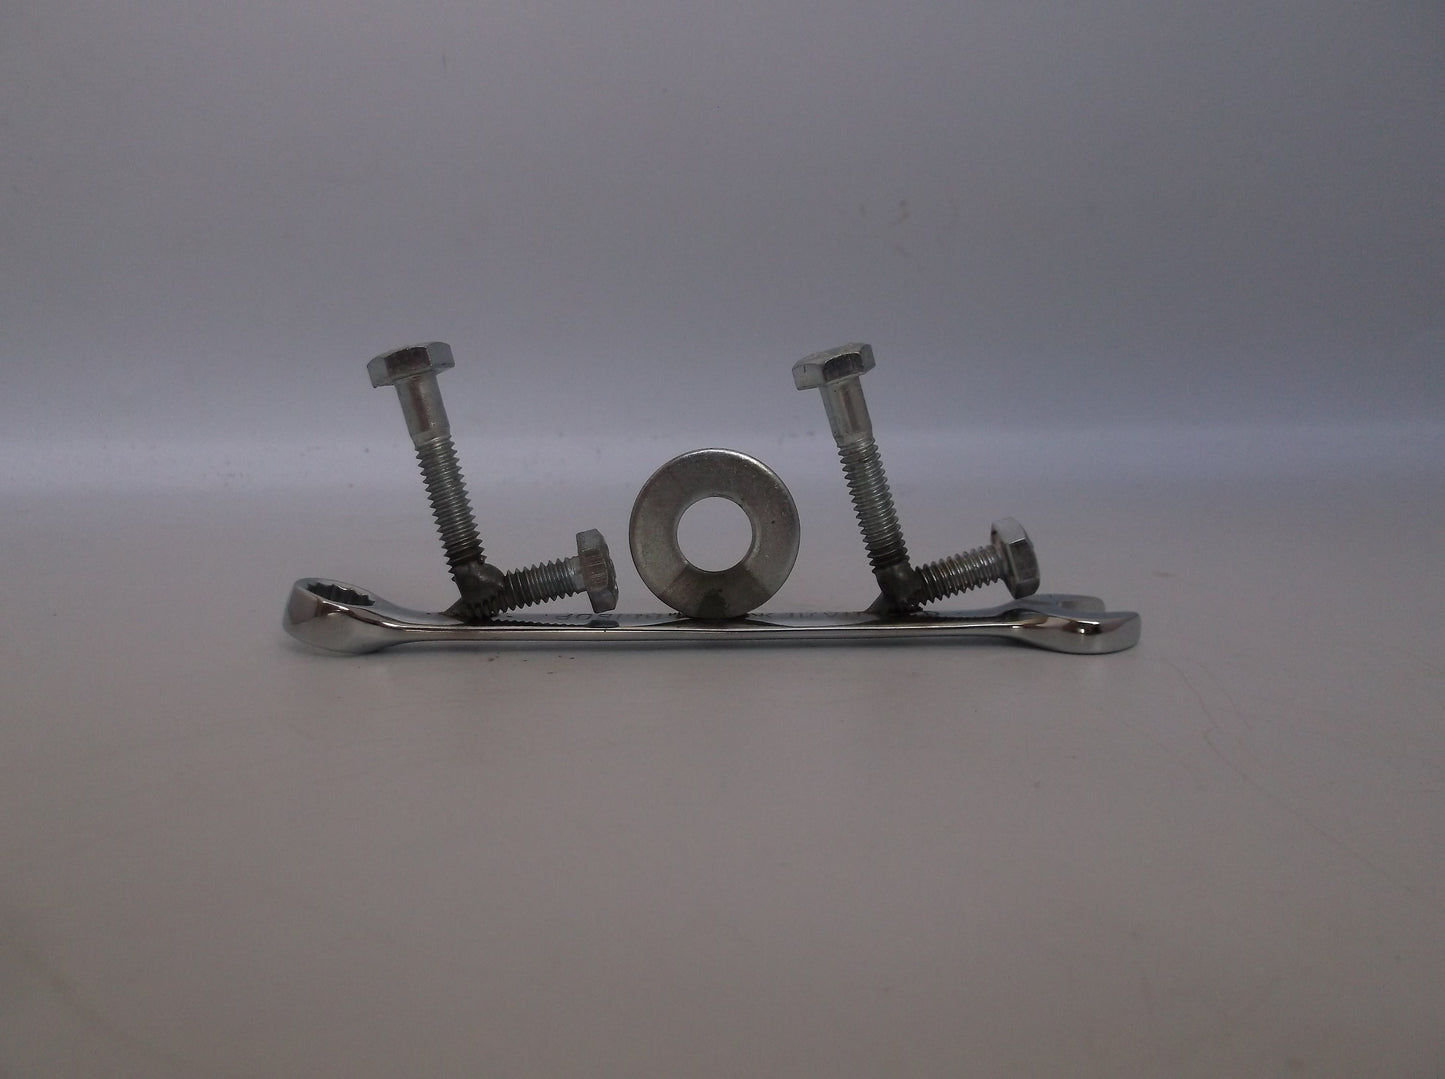 LOL, tiny wrench, miniature gift ideas, recycled, up cycled, welded metal art